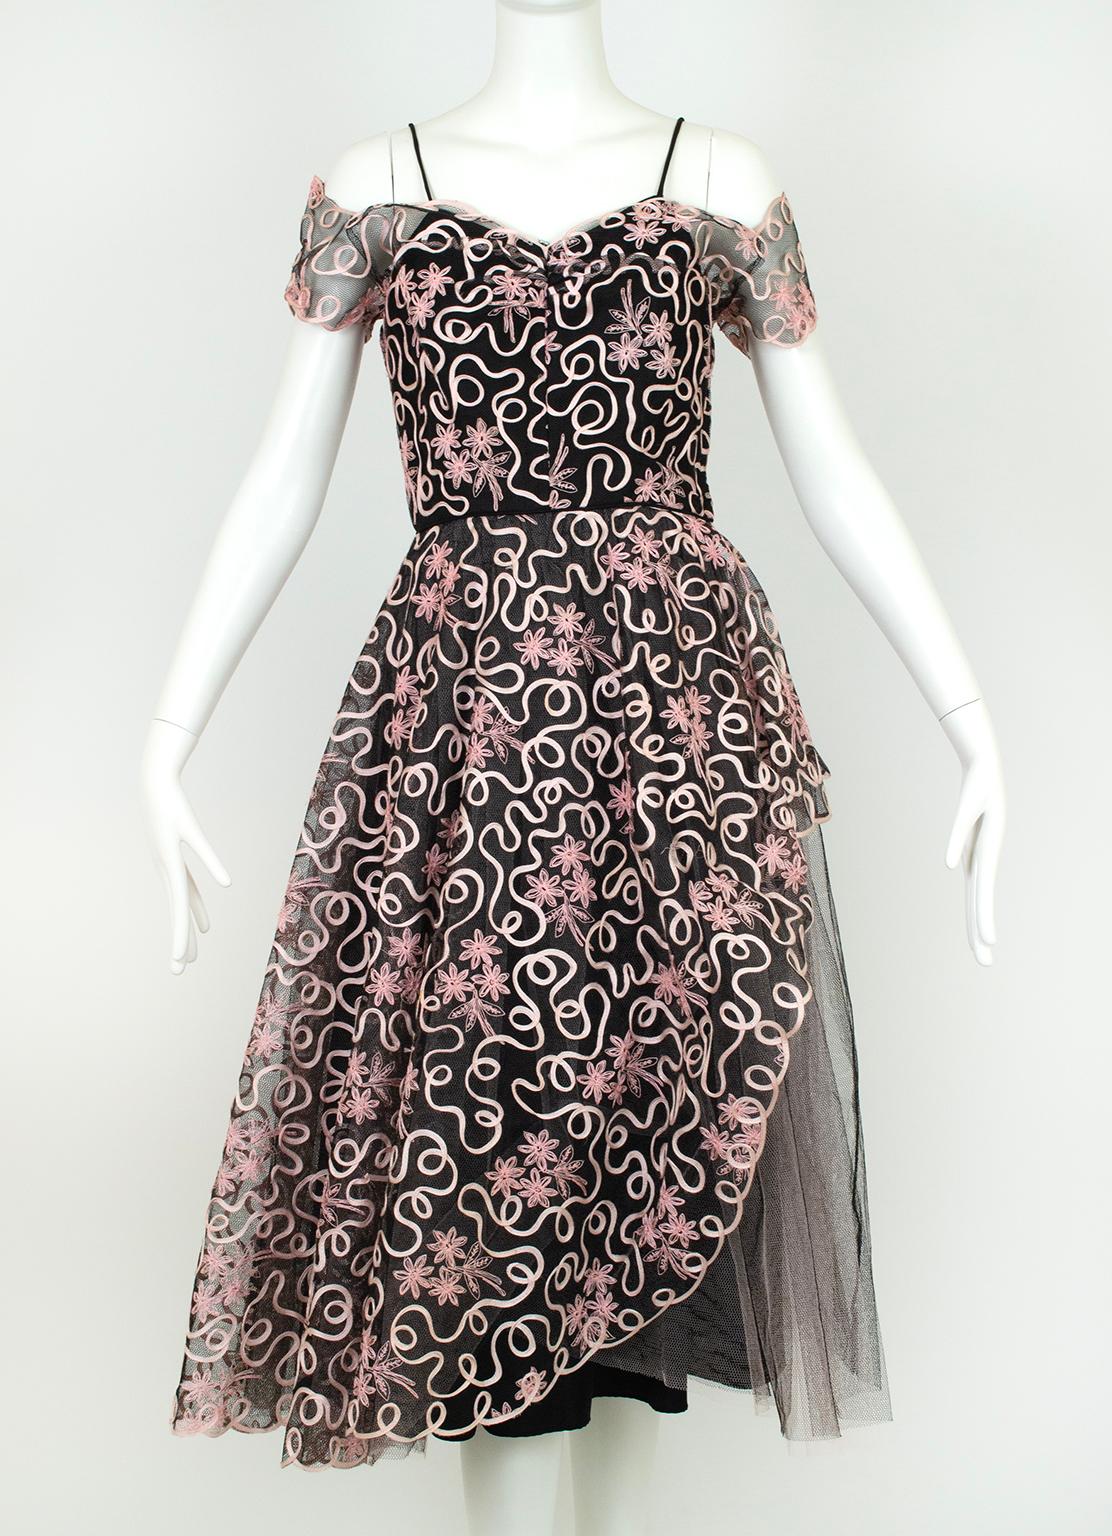 The combination of black and pink makes this dress simultaneously alluring and innocent. Cut with an asymmetrical 